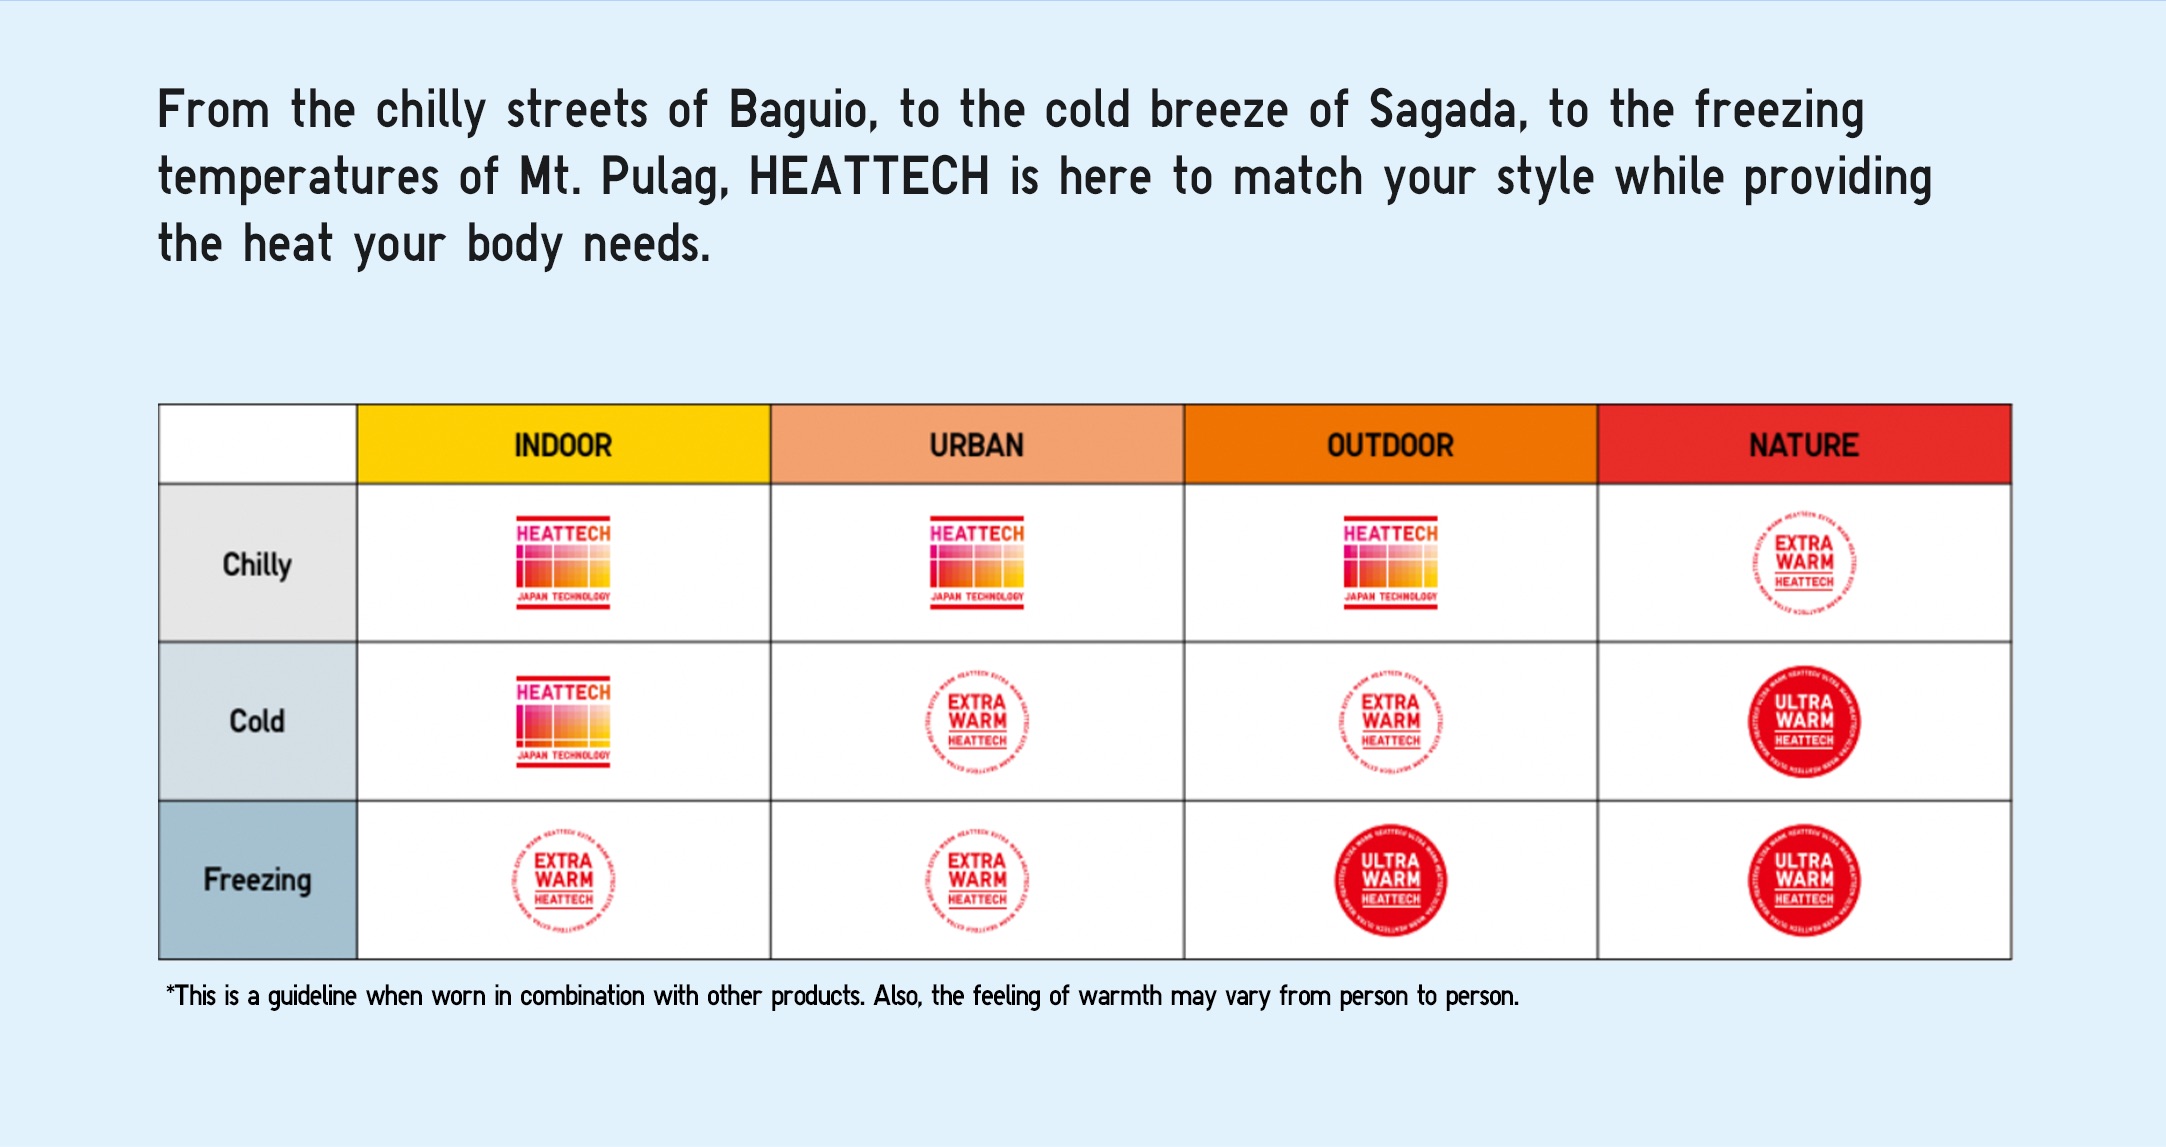 Brave the winter with UNIQLO's HEATTECH thermal technology